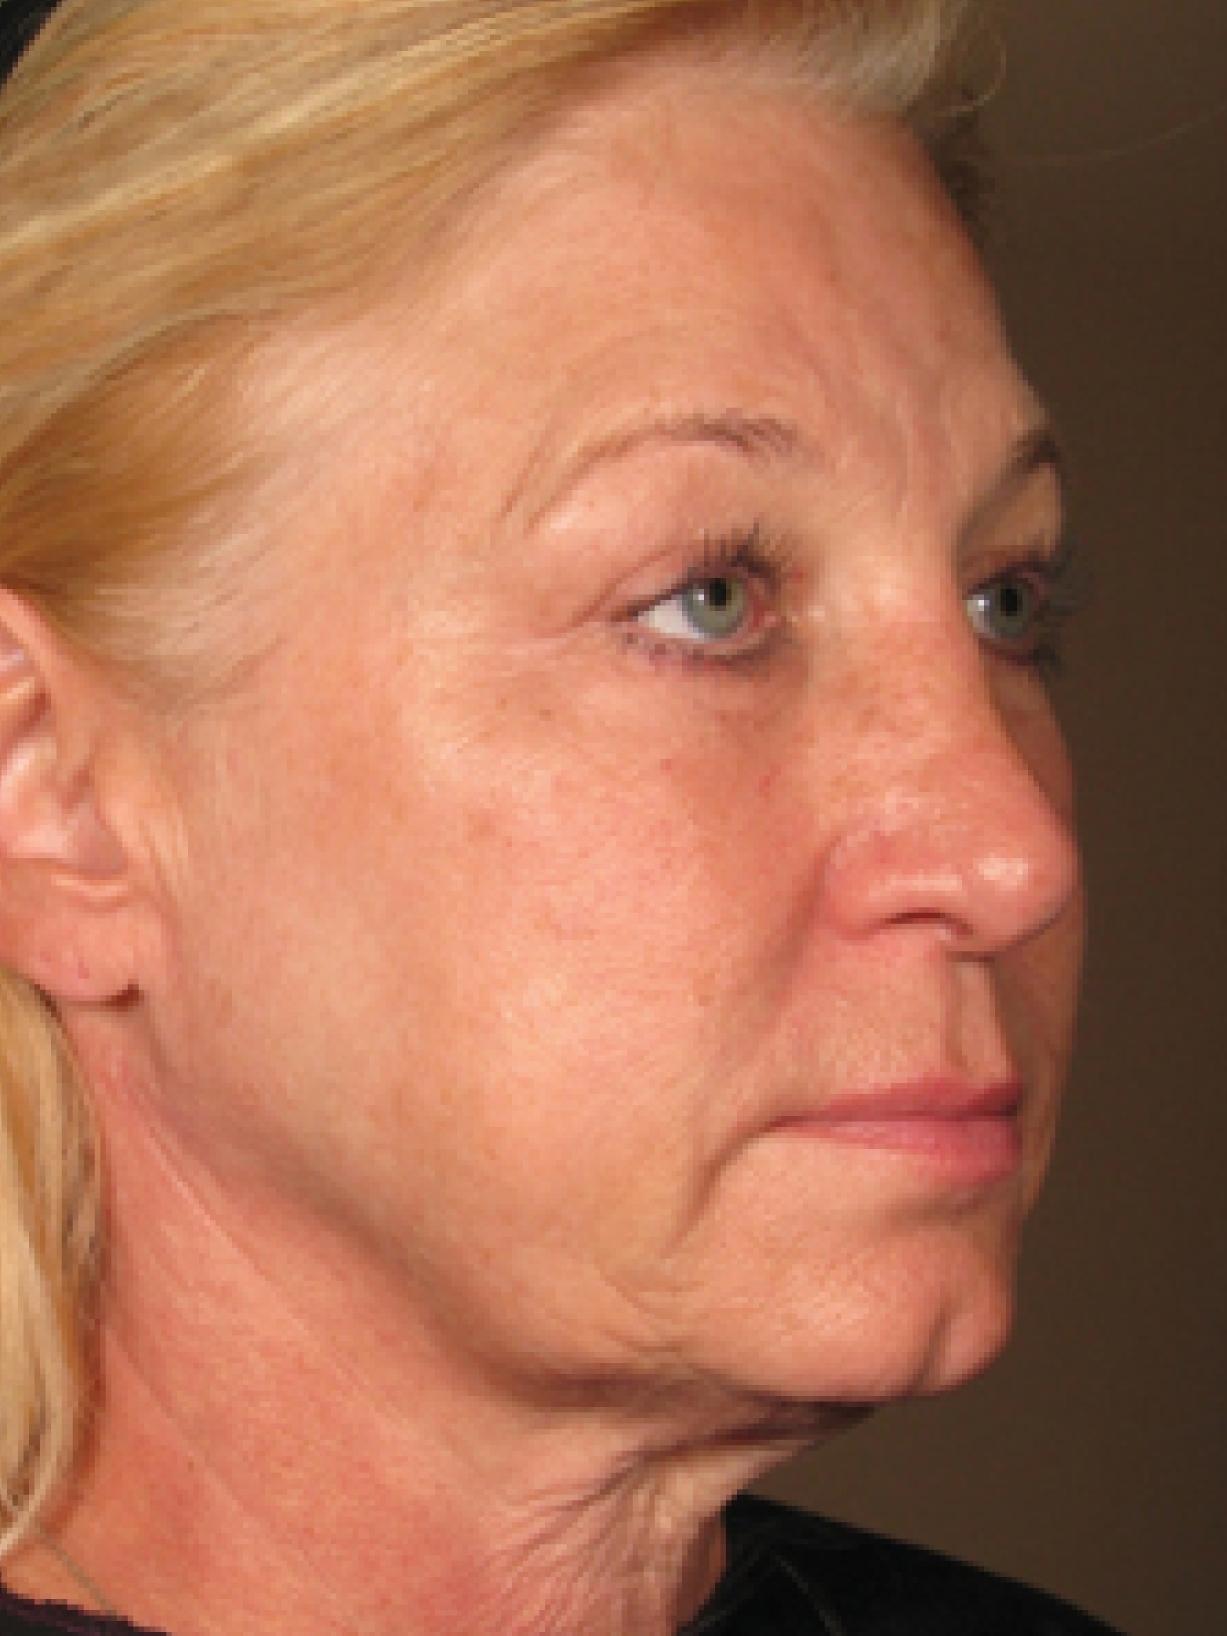 Ultherapy® - Face: Patient 4 - Before 